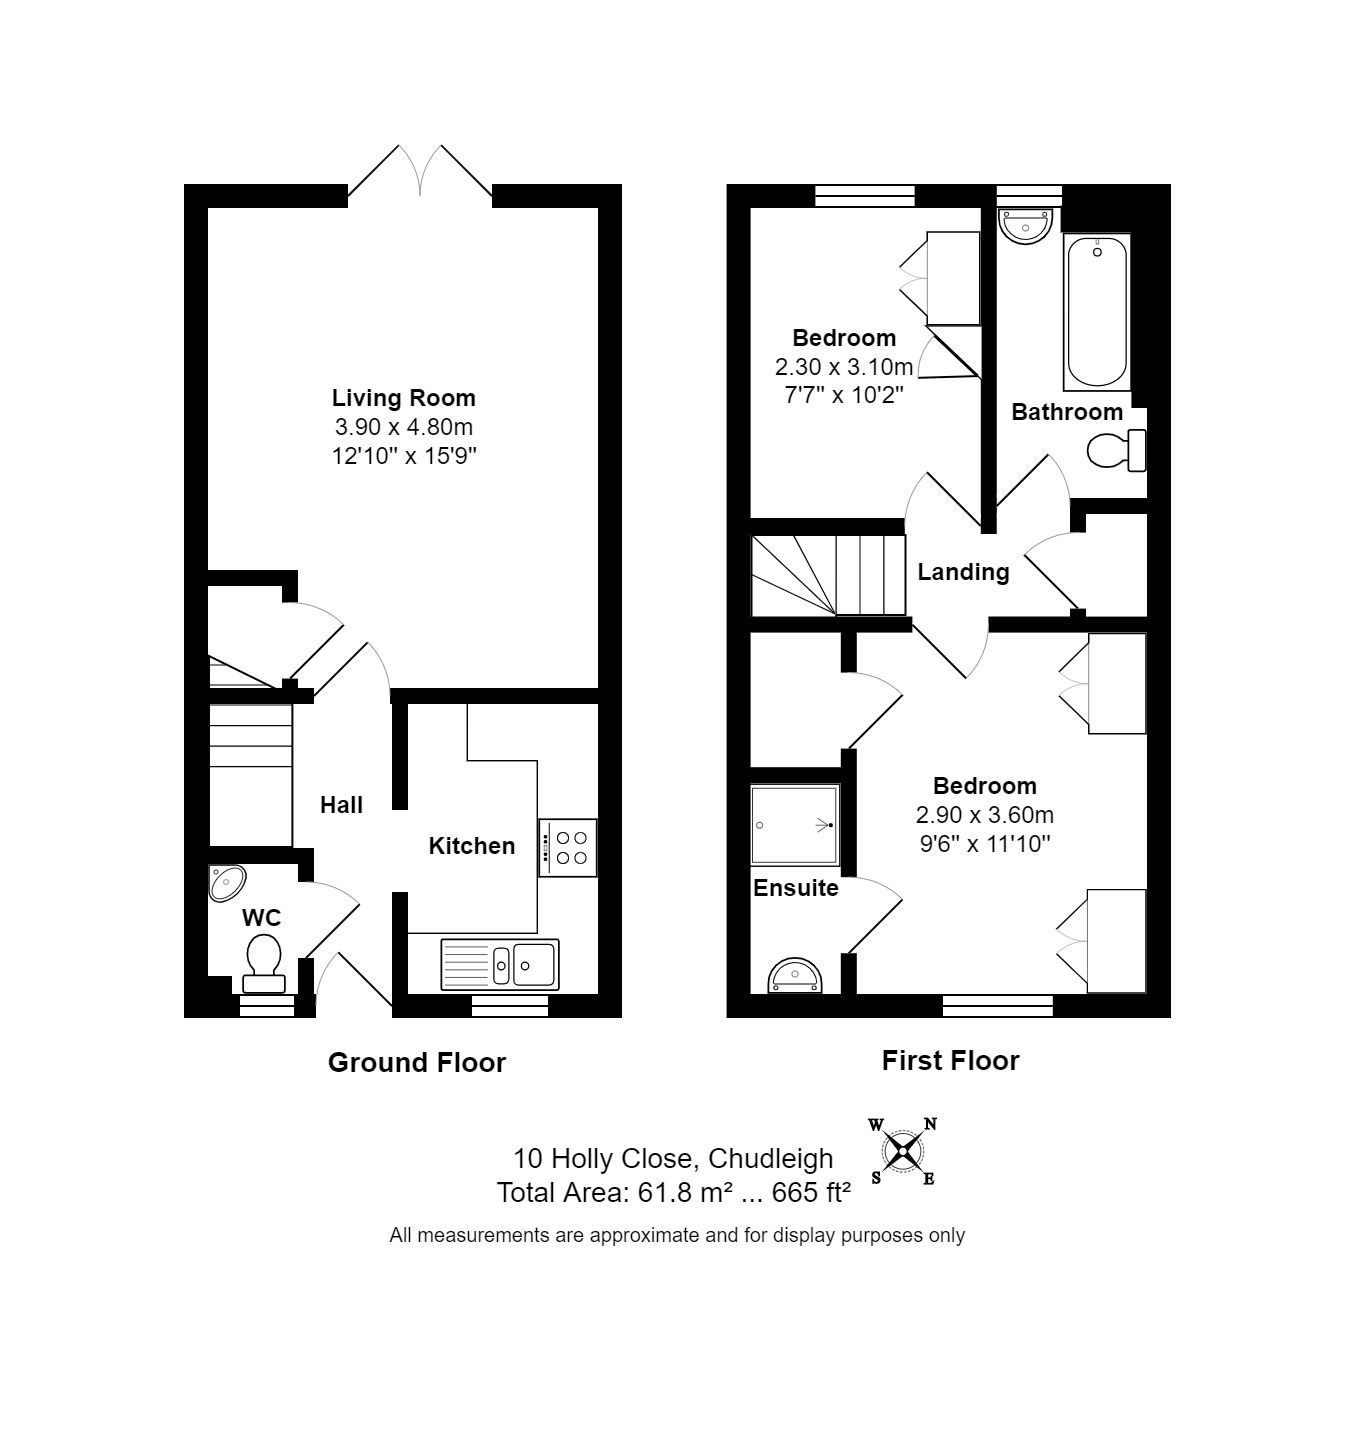 2 bed terraced house to rent in Chudleigh, Newton Abbot - Property floorplan